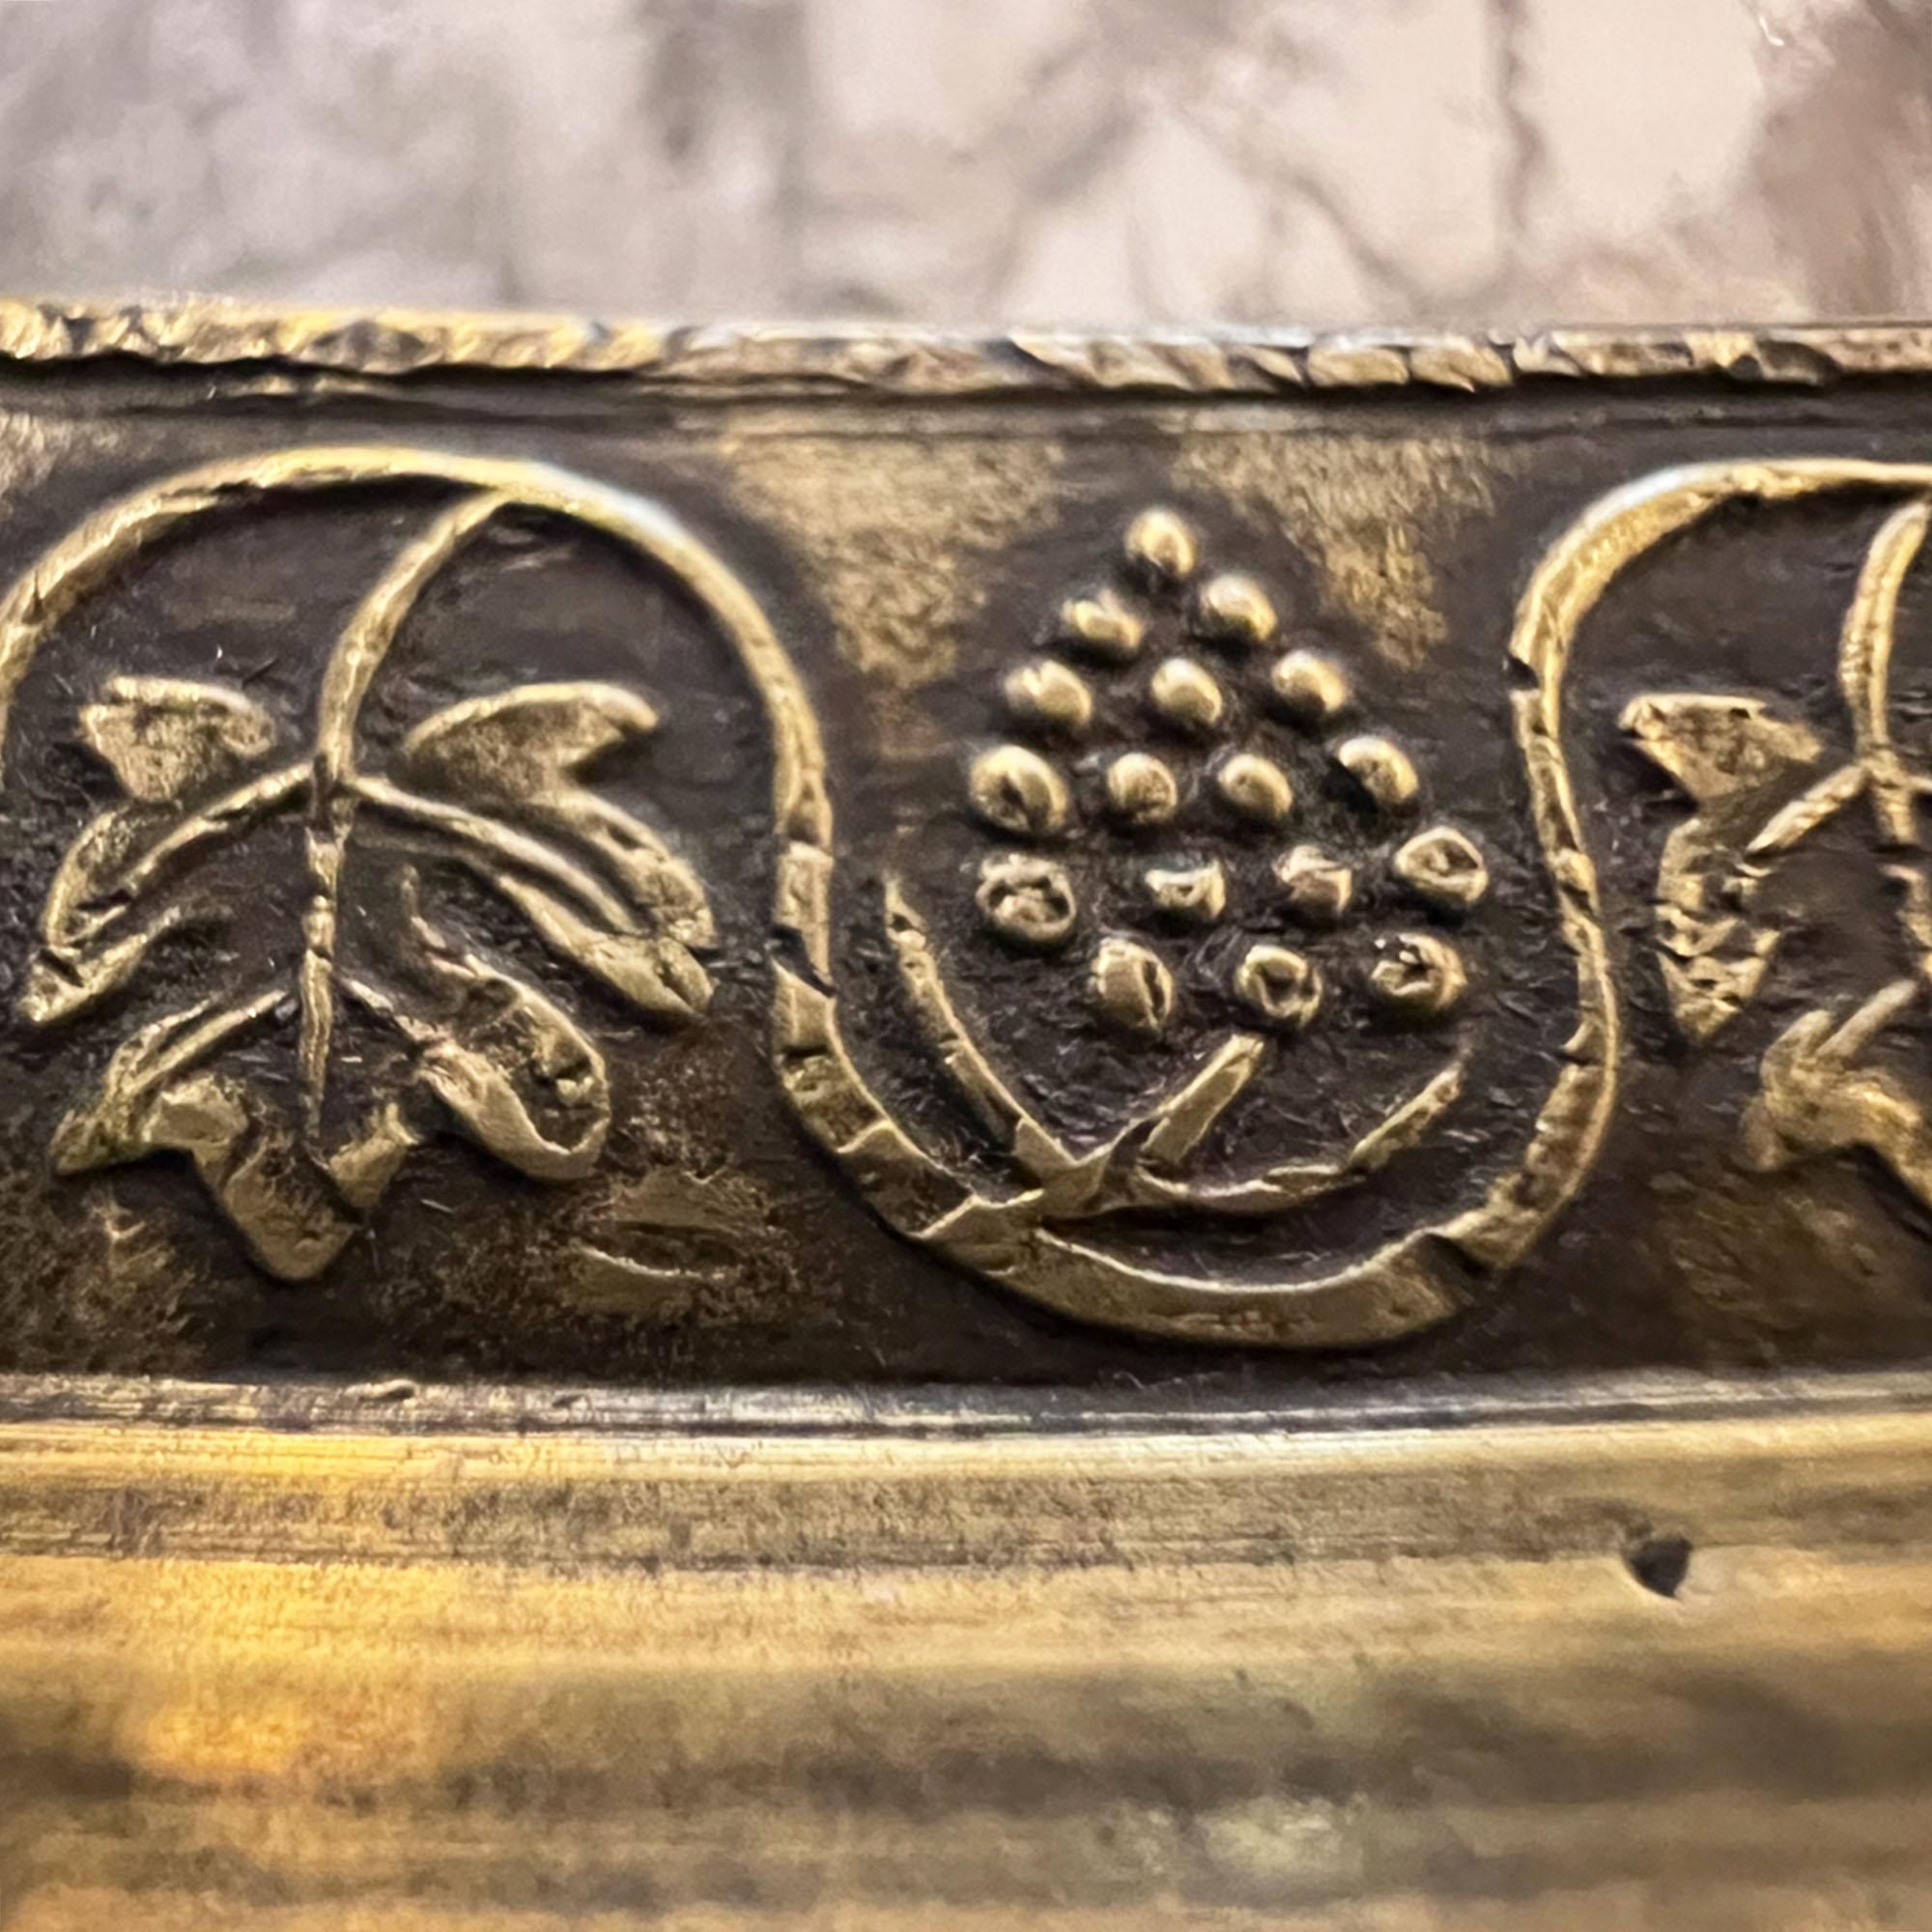 This superb large bronze surtout de table was made in France circa 1890.  Please have a look at all our pictures to see the intricate grape vine and flower detail around the edge more closely.

This is a really gorgeous centrepiece for the dining